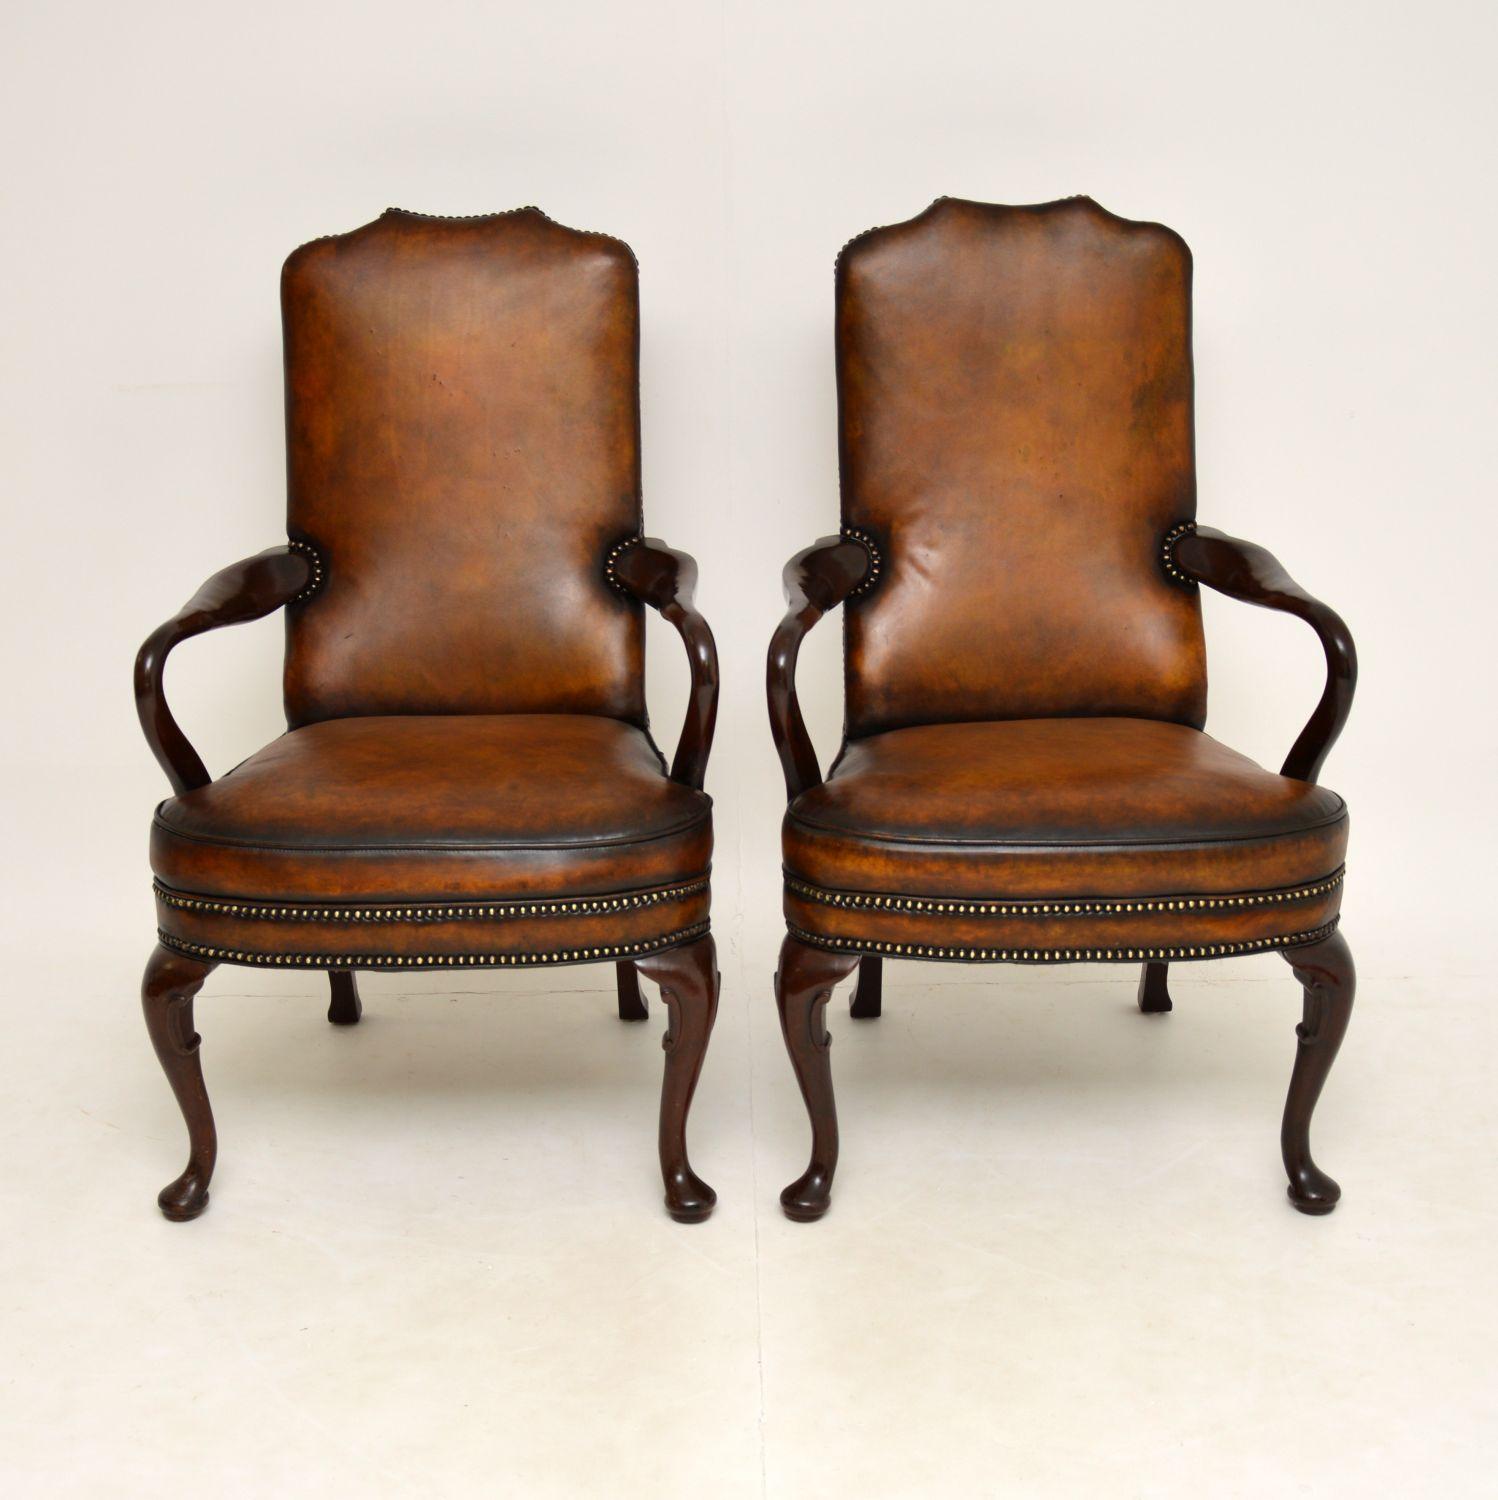 A stunning pair of Georgian style antique leather and mahogany armchairs, dating from around the 1930’s period.

The quality is fantastic, these are well built and very comfortable. The seats are well sprung, and they are upholstered in hand